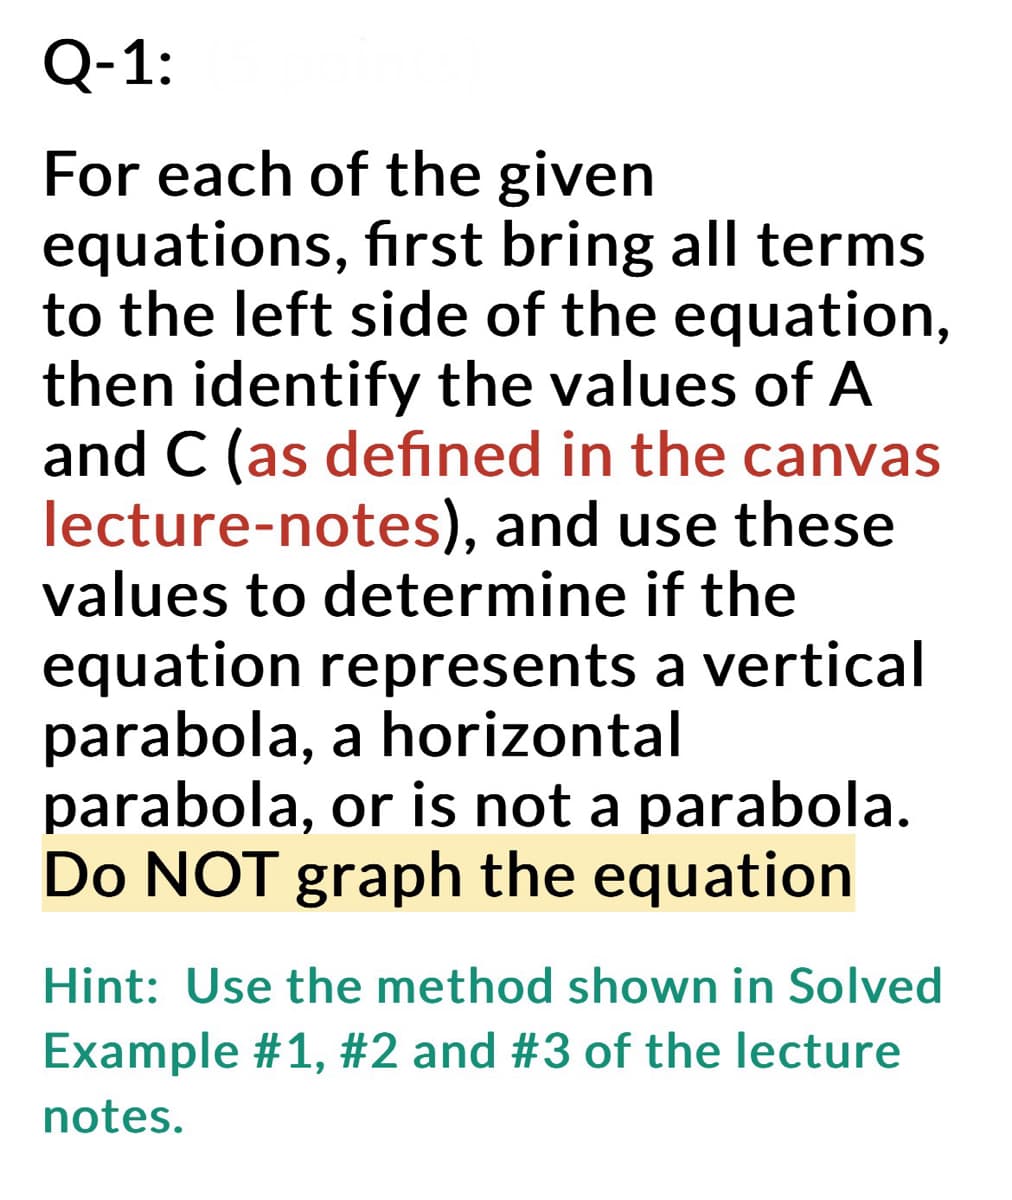 Q-1:
For each of the given
equations, first bring all terms
to the left side of the equation,
then identify the values of A
and C (as defined in the canvas
lecture-notes), and use these
values to determine if the
equation represents a vertical
parabola,a horizontal
parabola, or is not a parabola.
Do NOT graph the equation
Hint: Use the method shown in Solved
Example #1, #2 and #3 of the lecture
notes.